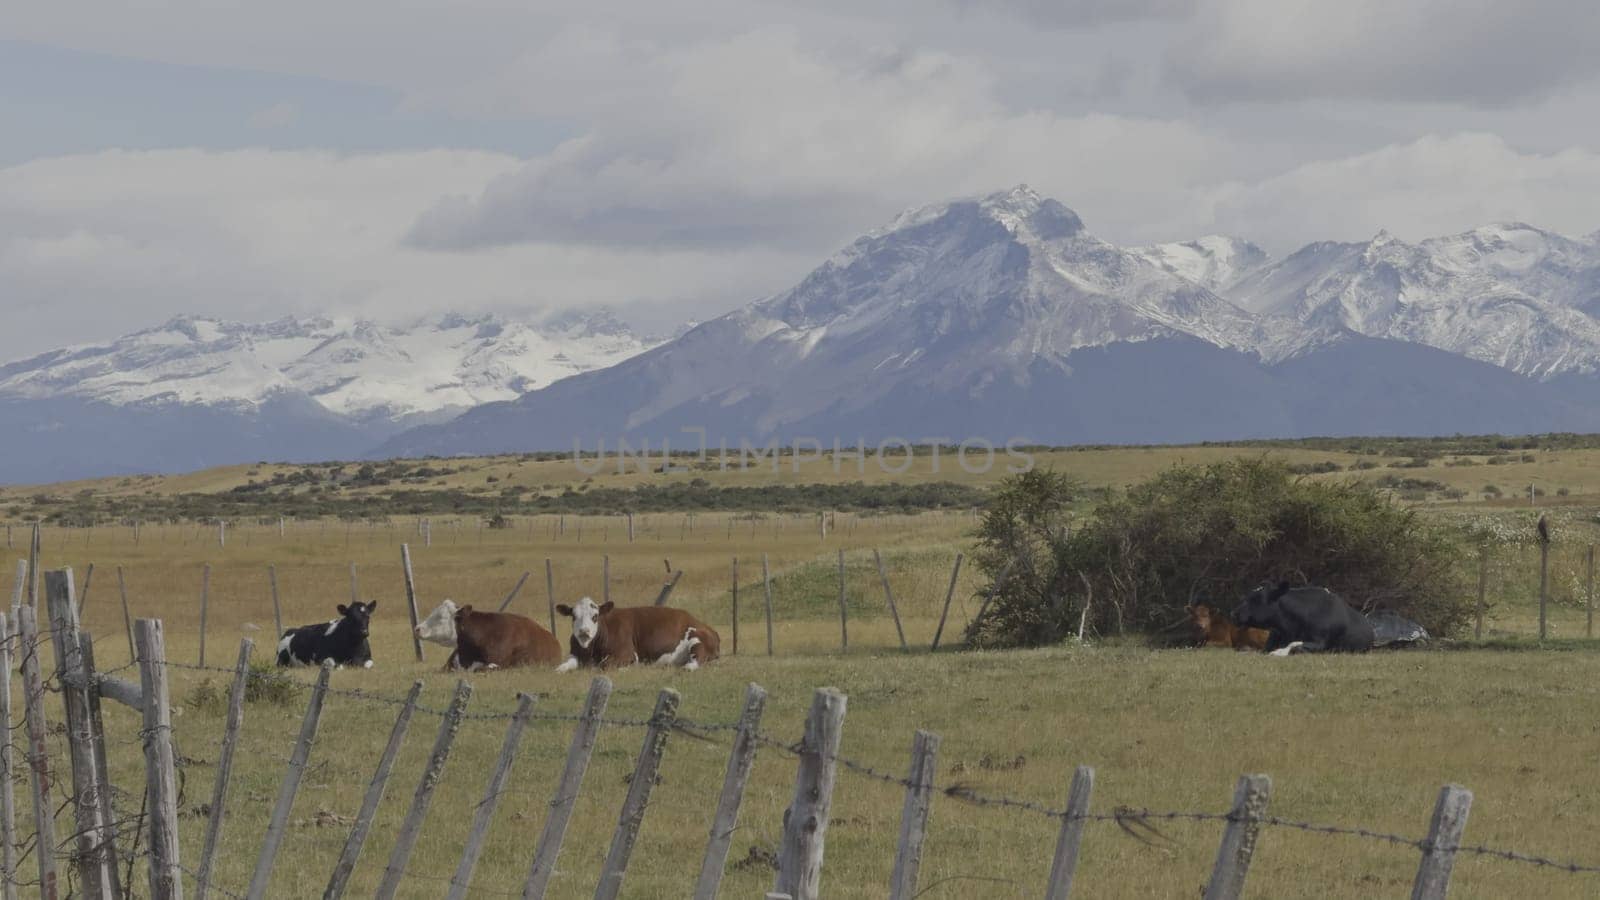 Cows Grazing Peacefully in Patagonian Meadow with Glaciers by FerradalFCG